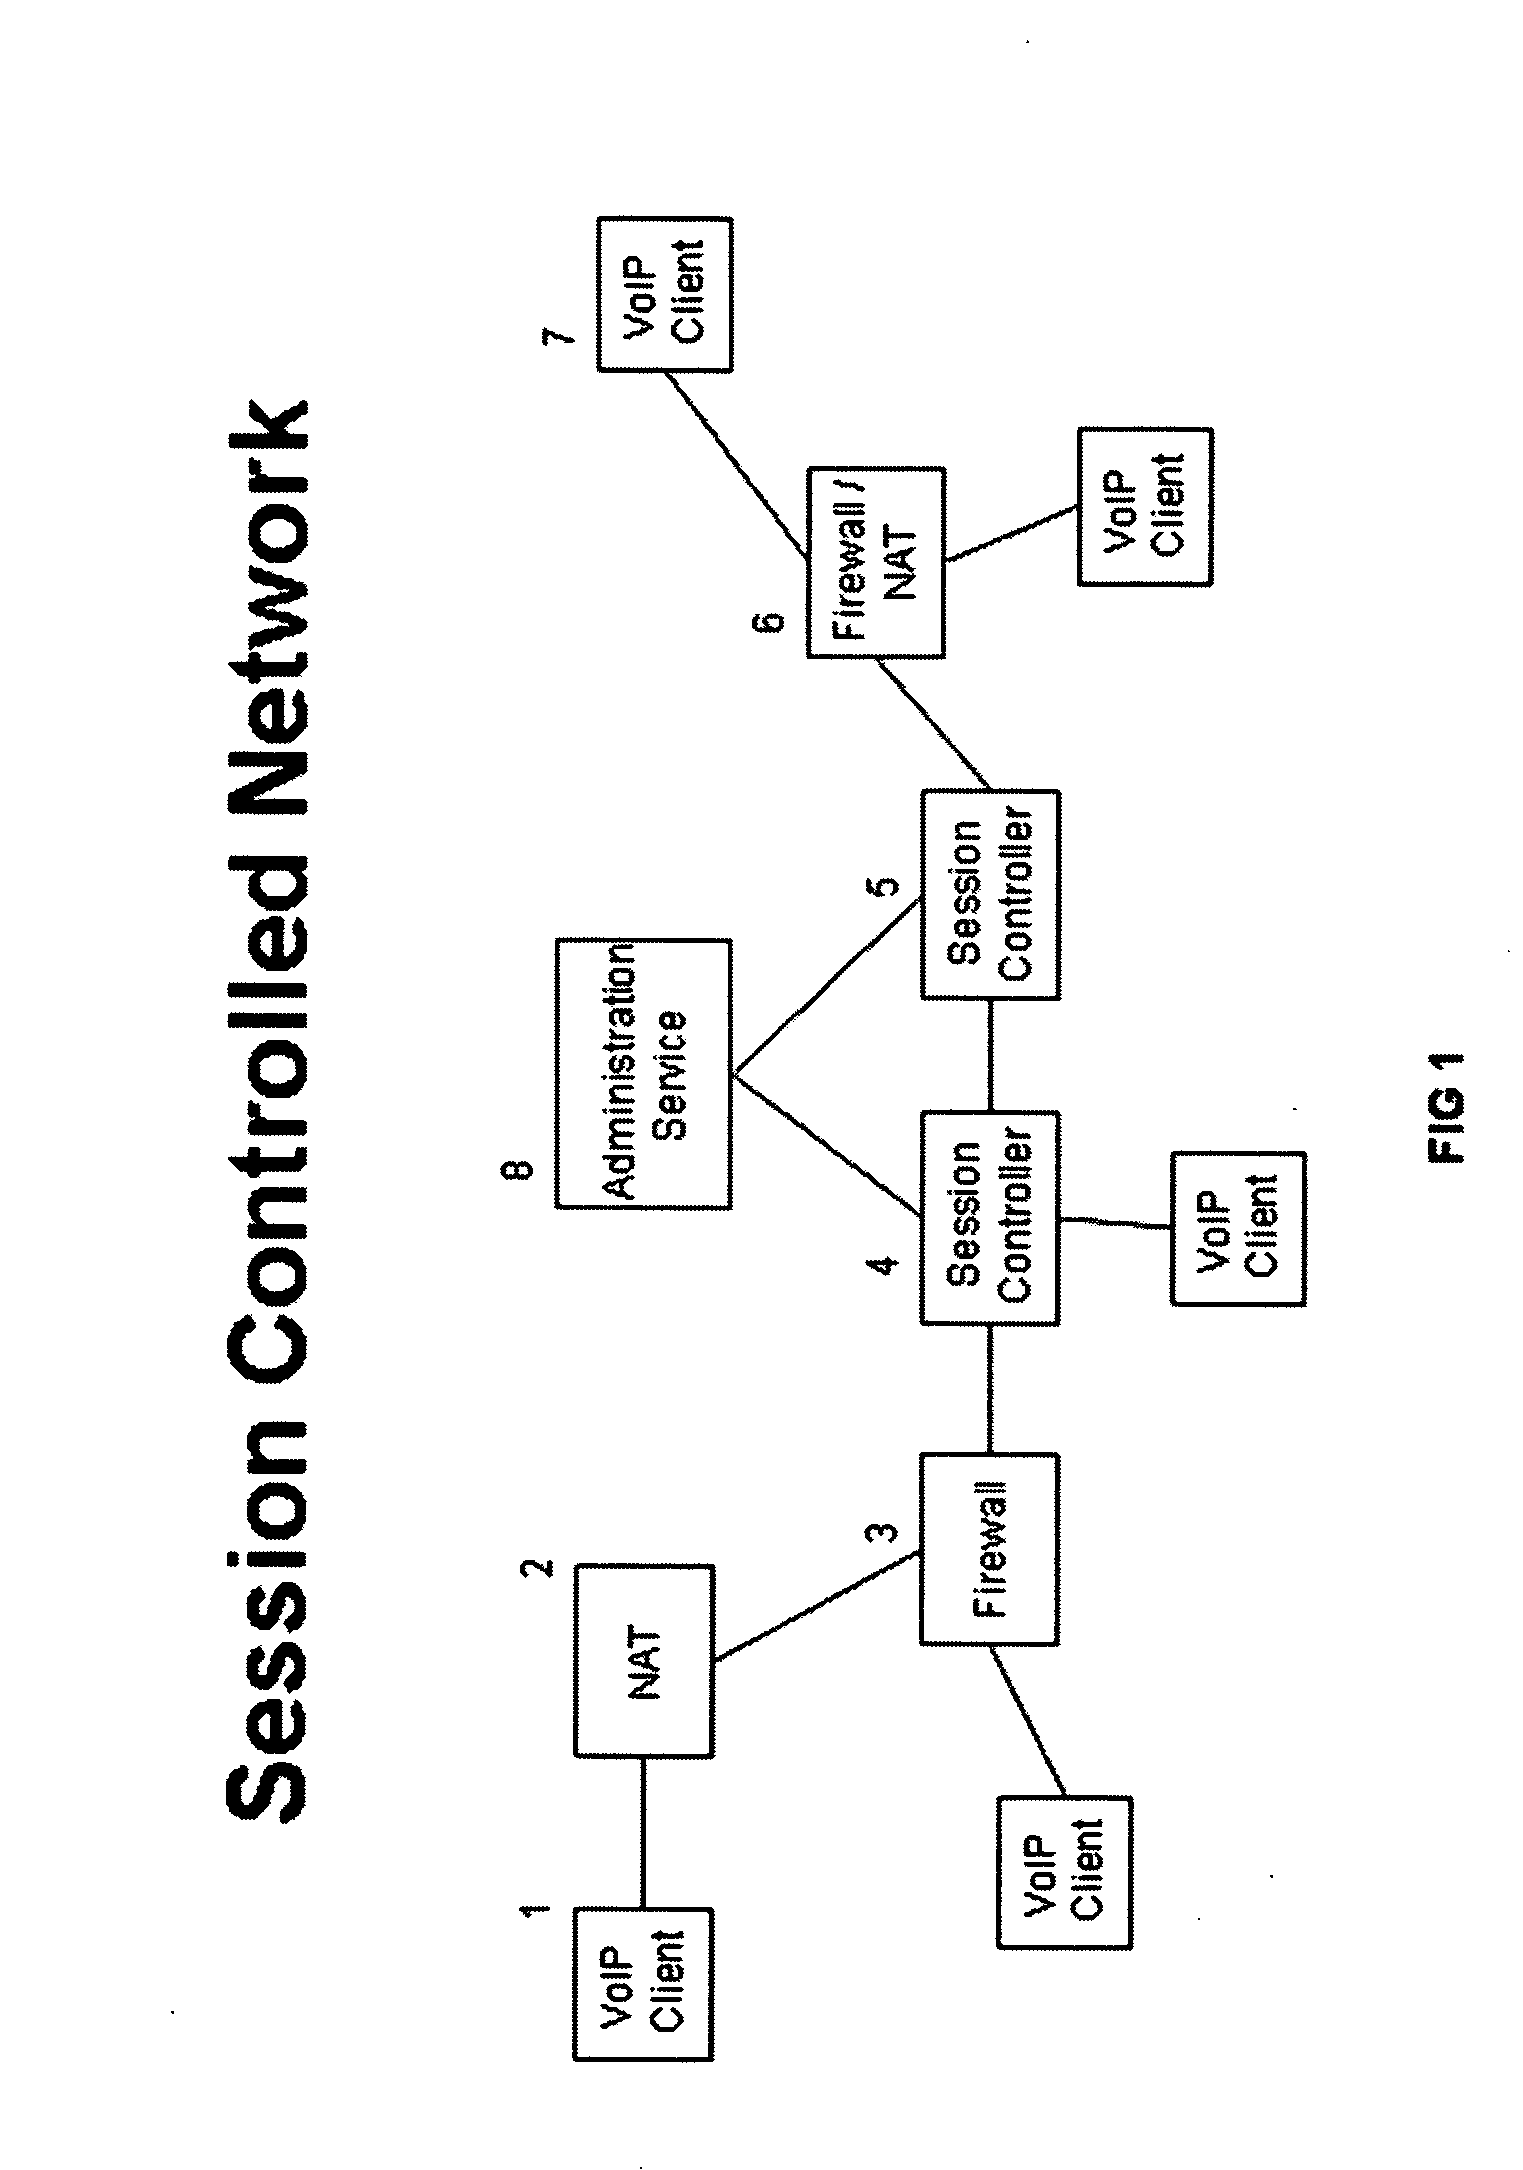 Architecture for a multi-media session controlled network